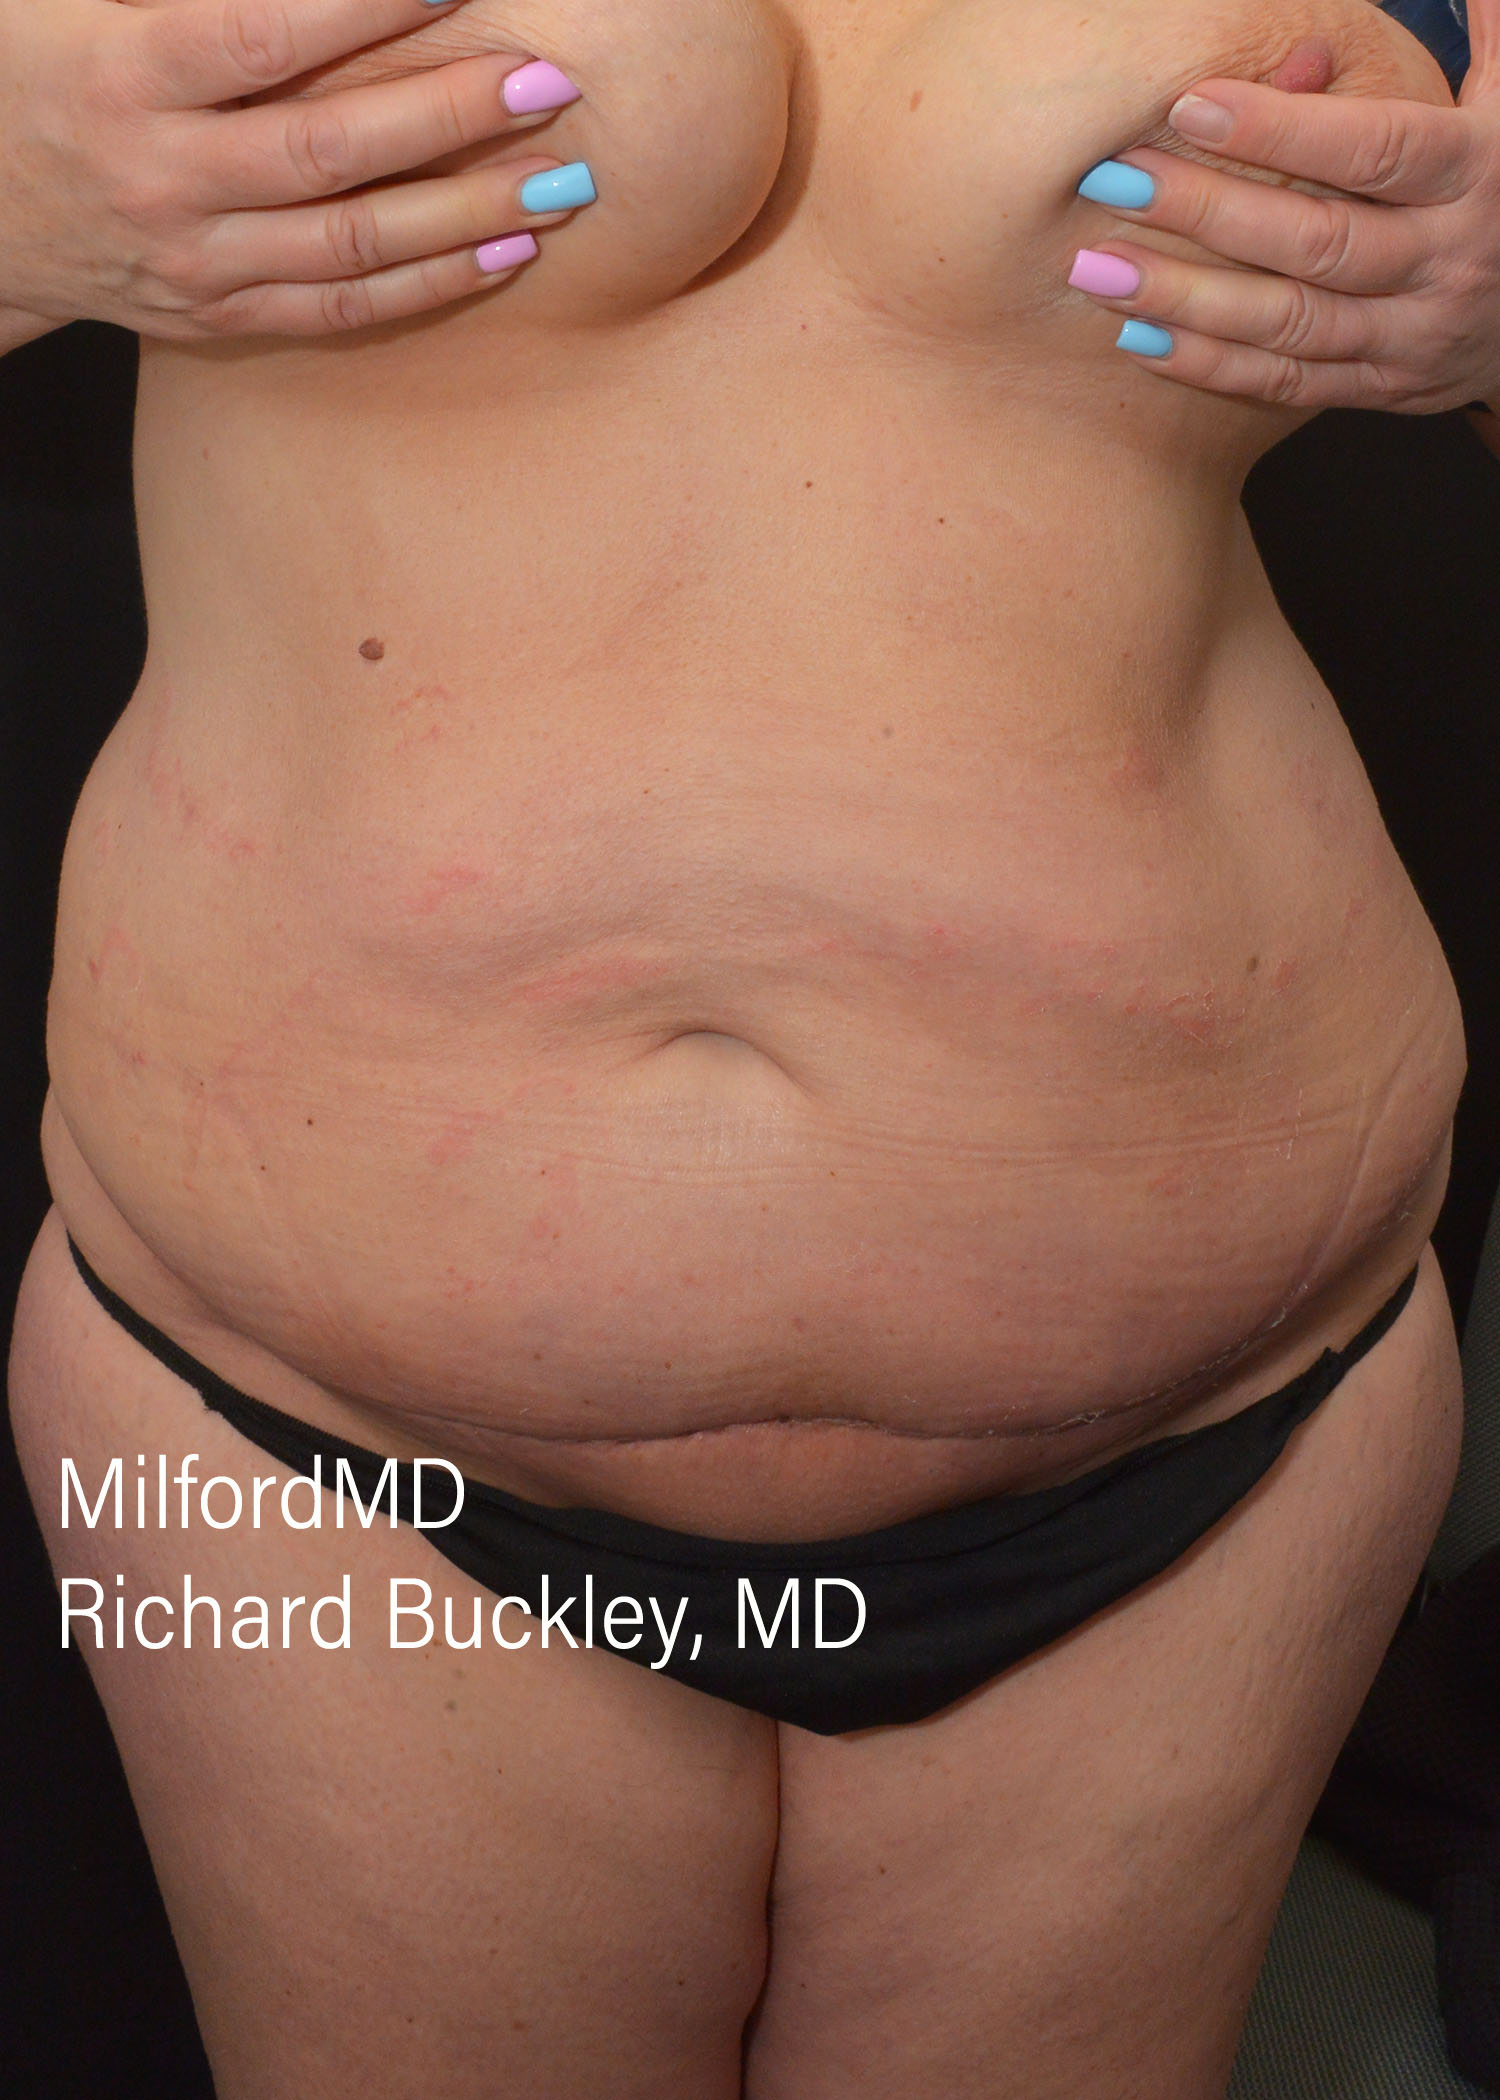 Reverse Abdominoplasty Before and After Photos,Reverse Abdominoplasty,Reverse Abdominoplasty Before and After, Abdominoplasty – Reverse